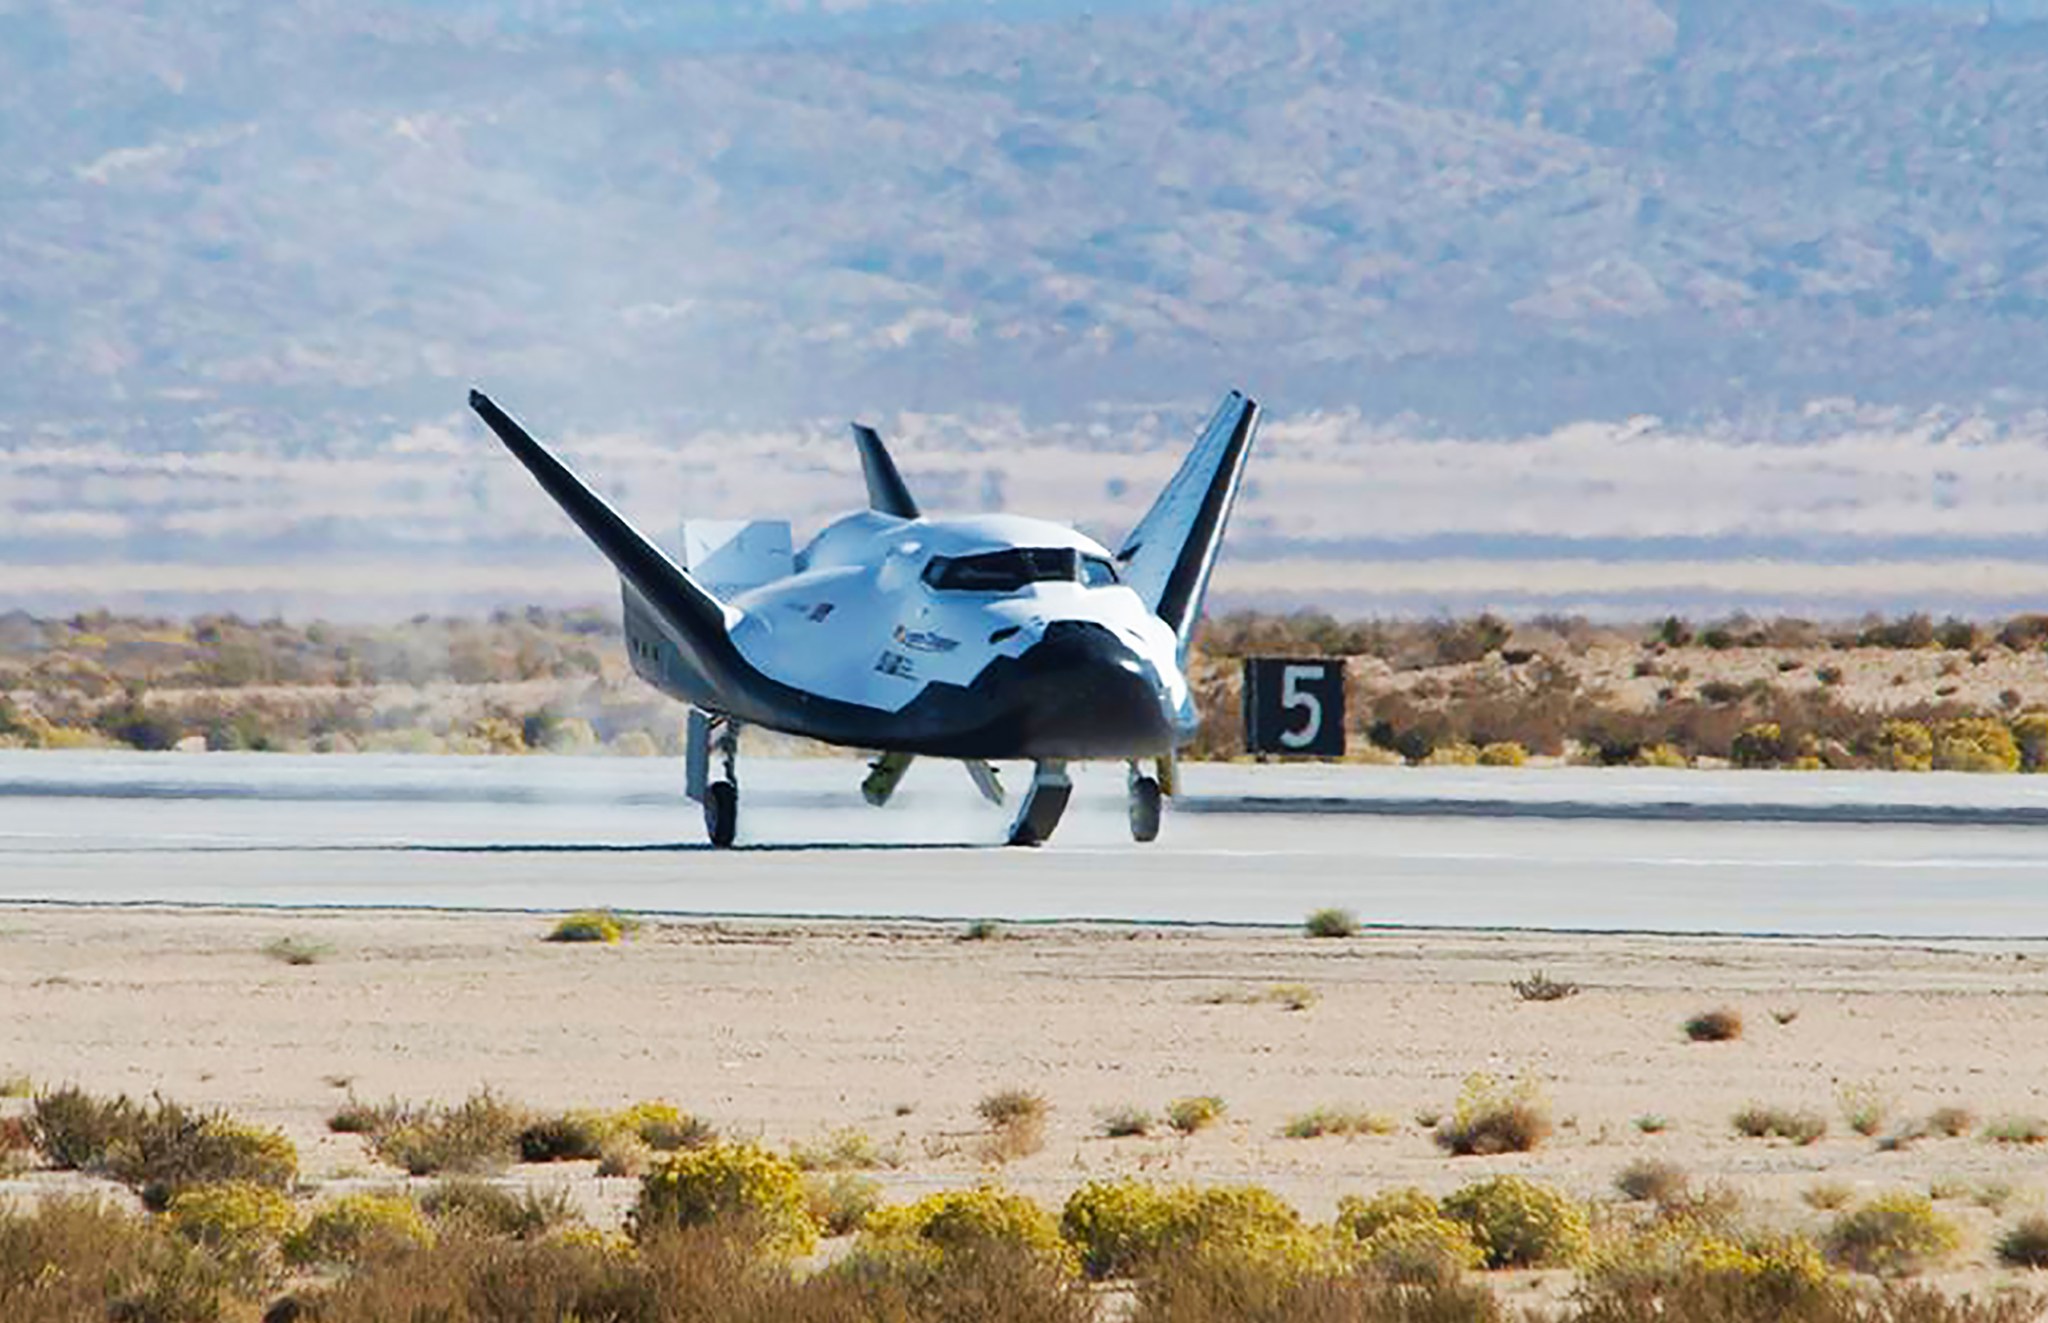 First Dream Chaser Vehicle Ready for Final Testing 